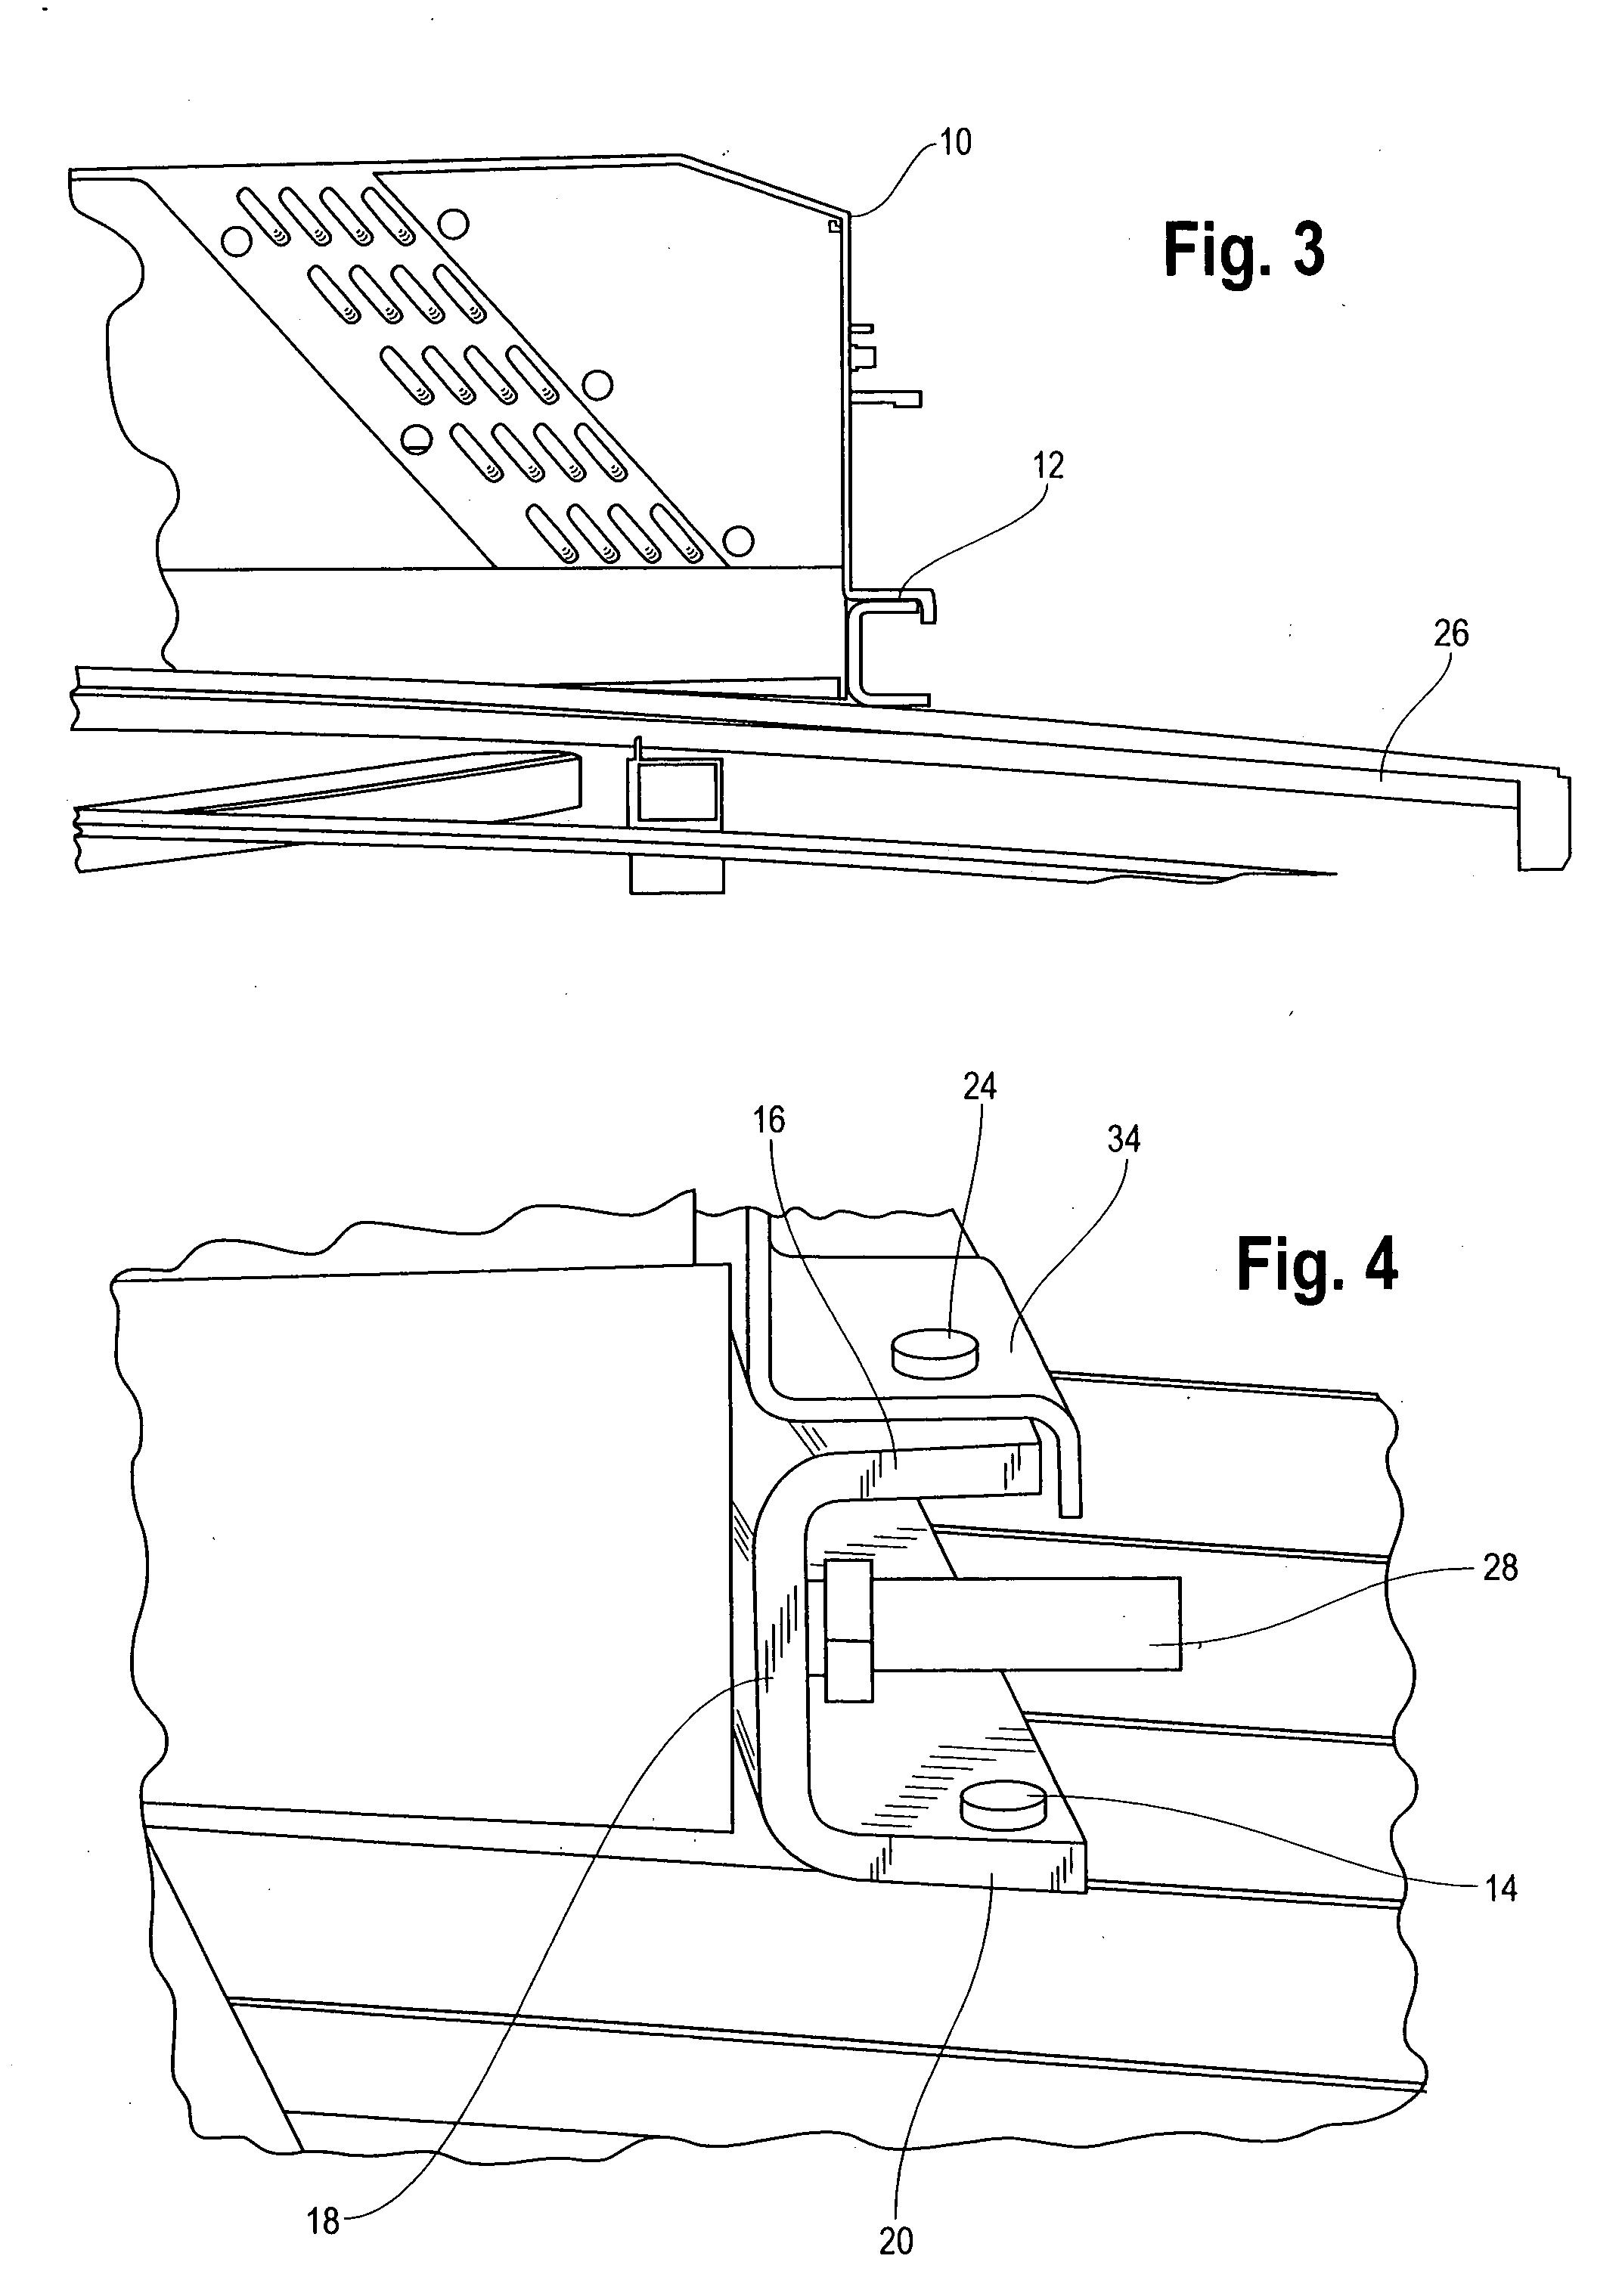 Modular rooftop air conditioning system mounting arrangement